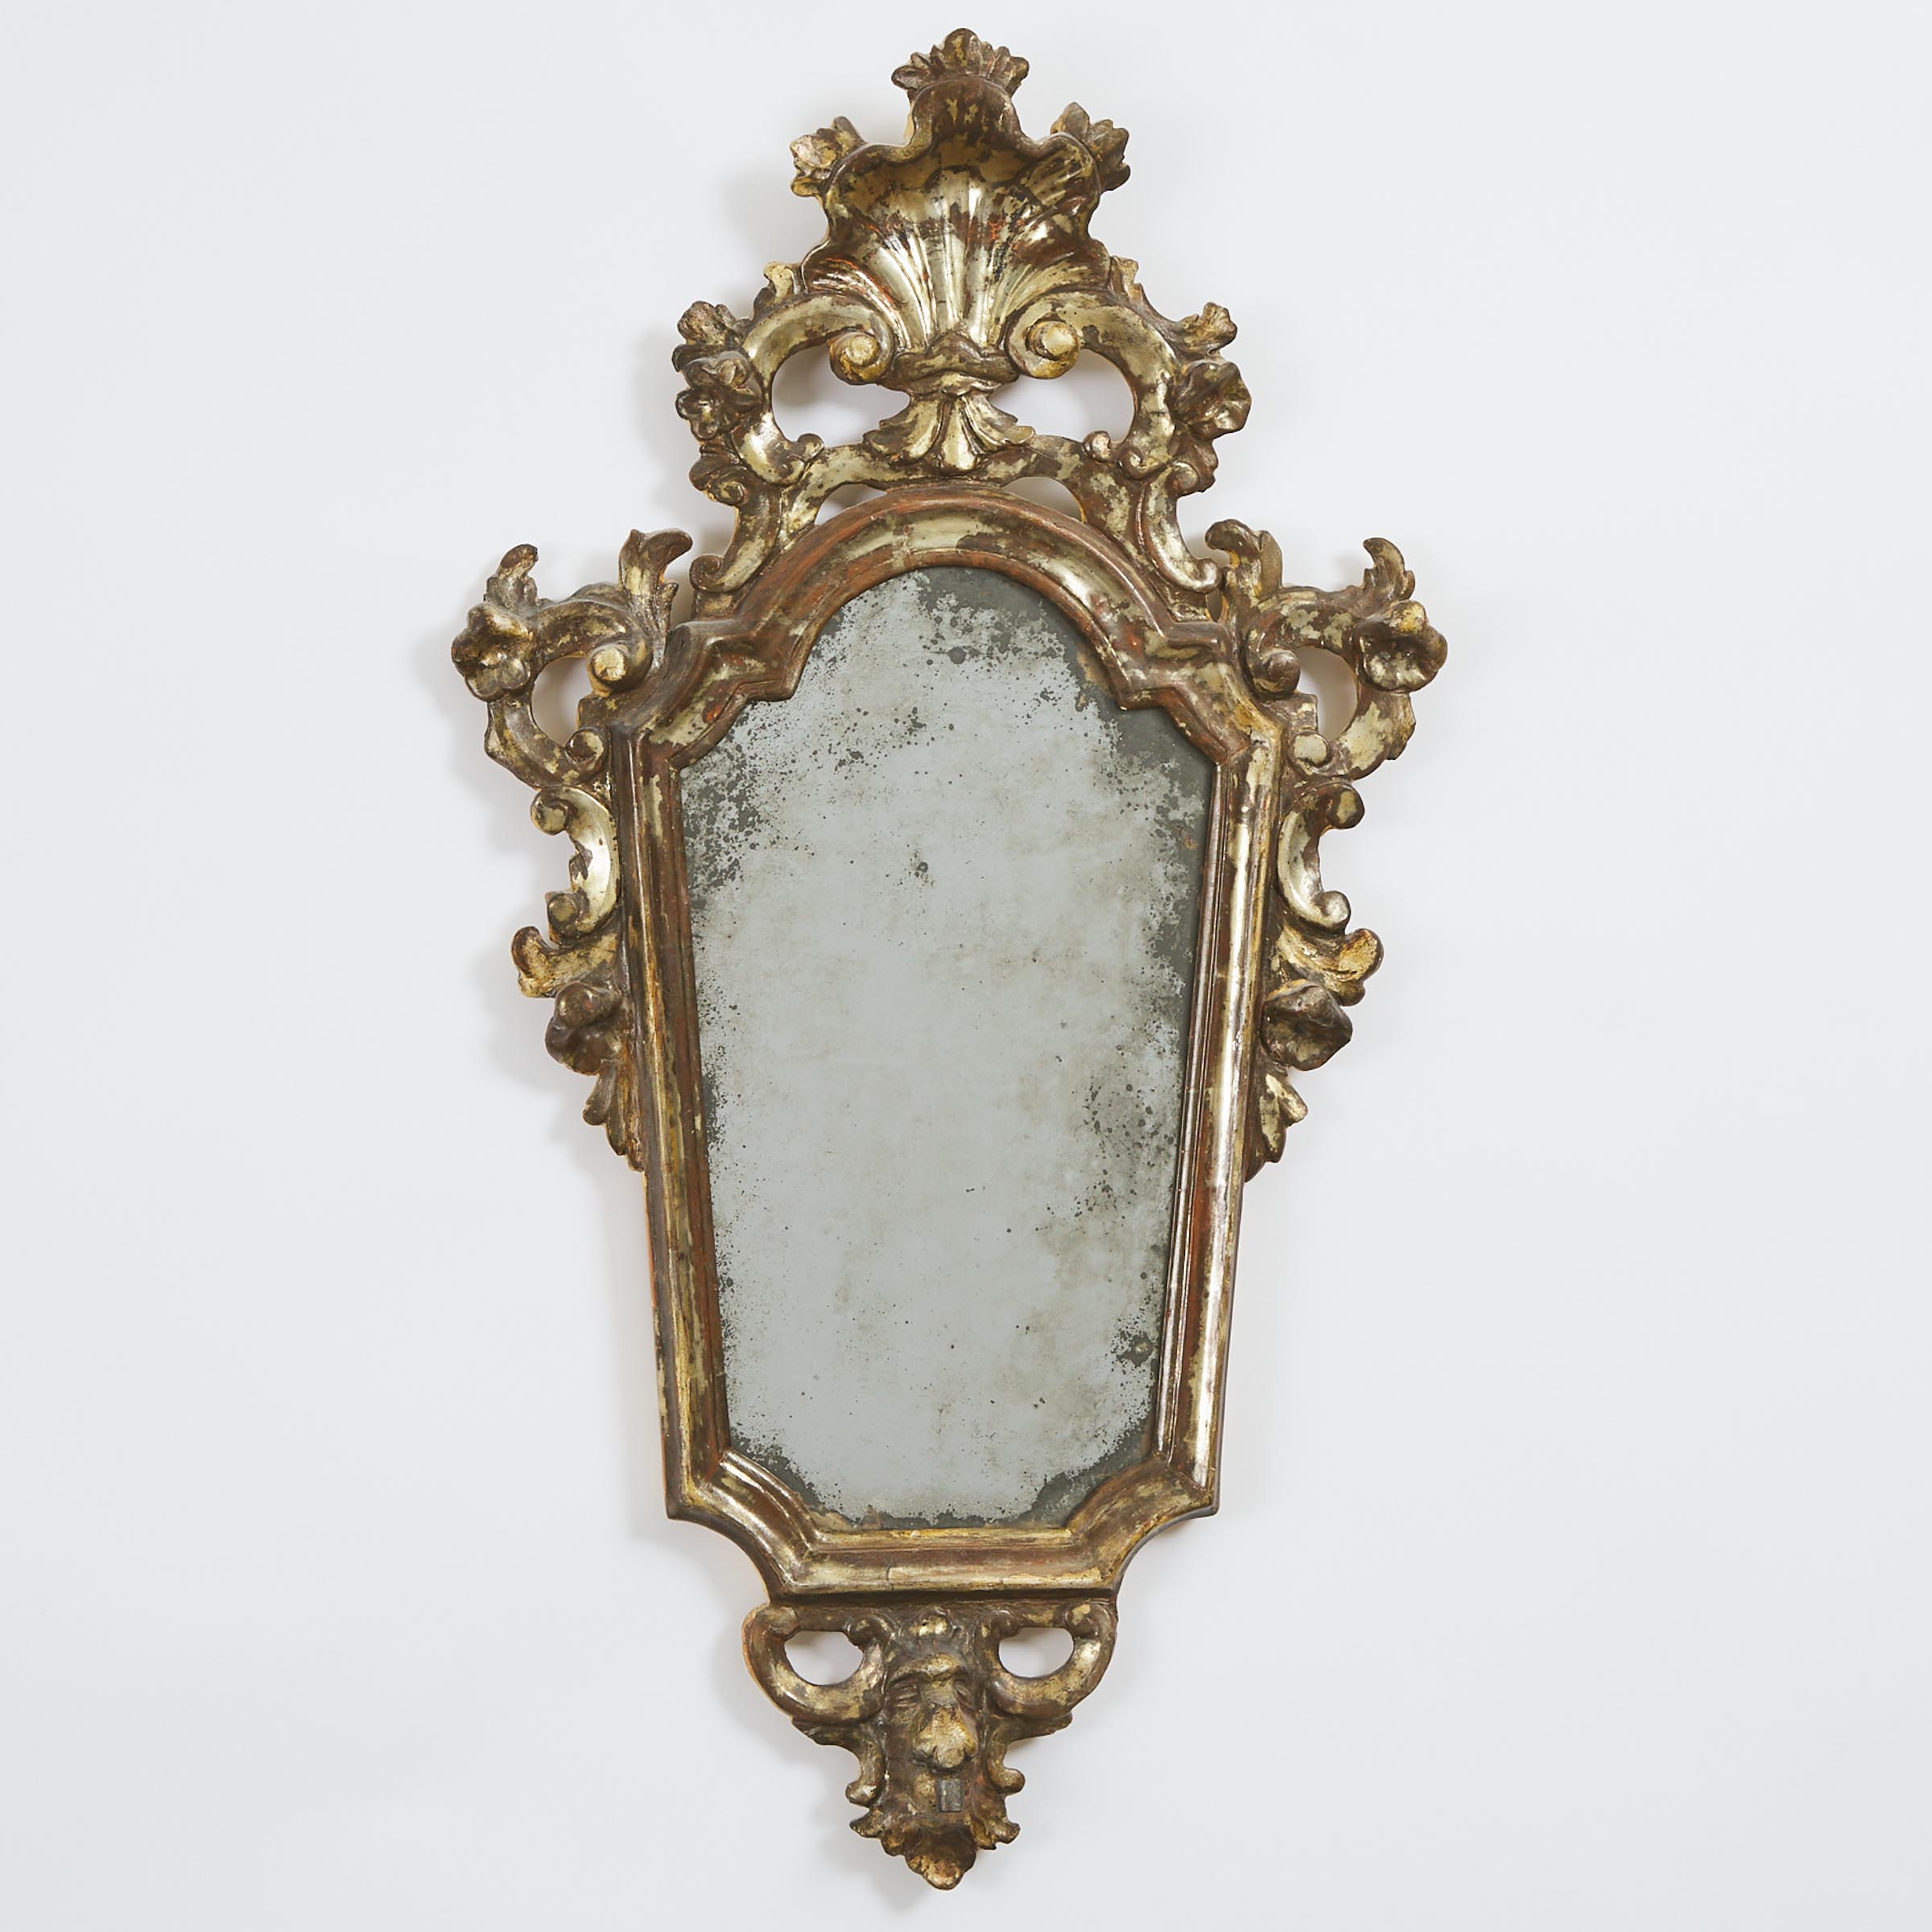 Florentine SIlver Giltwood Mirrored Wall Sconce, 19th/early 20th century